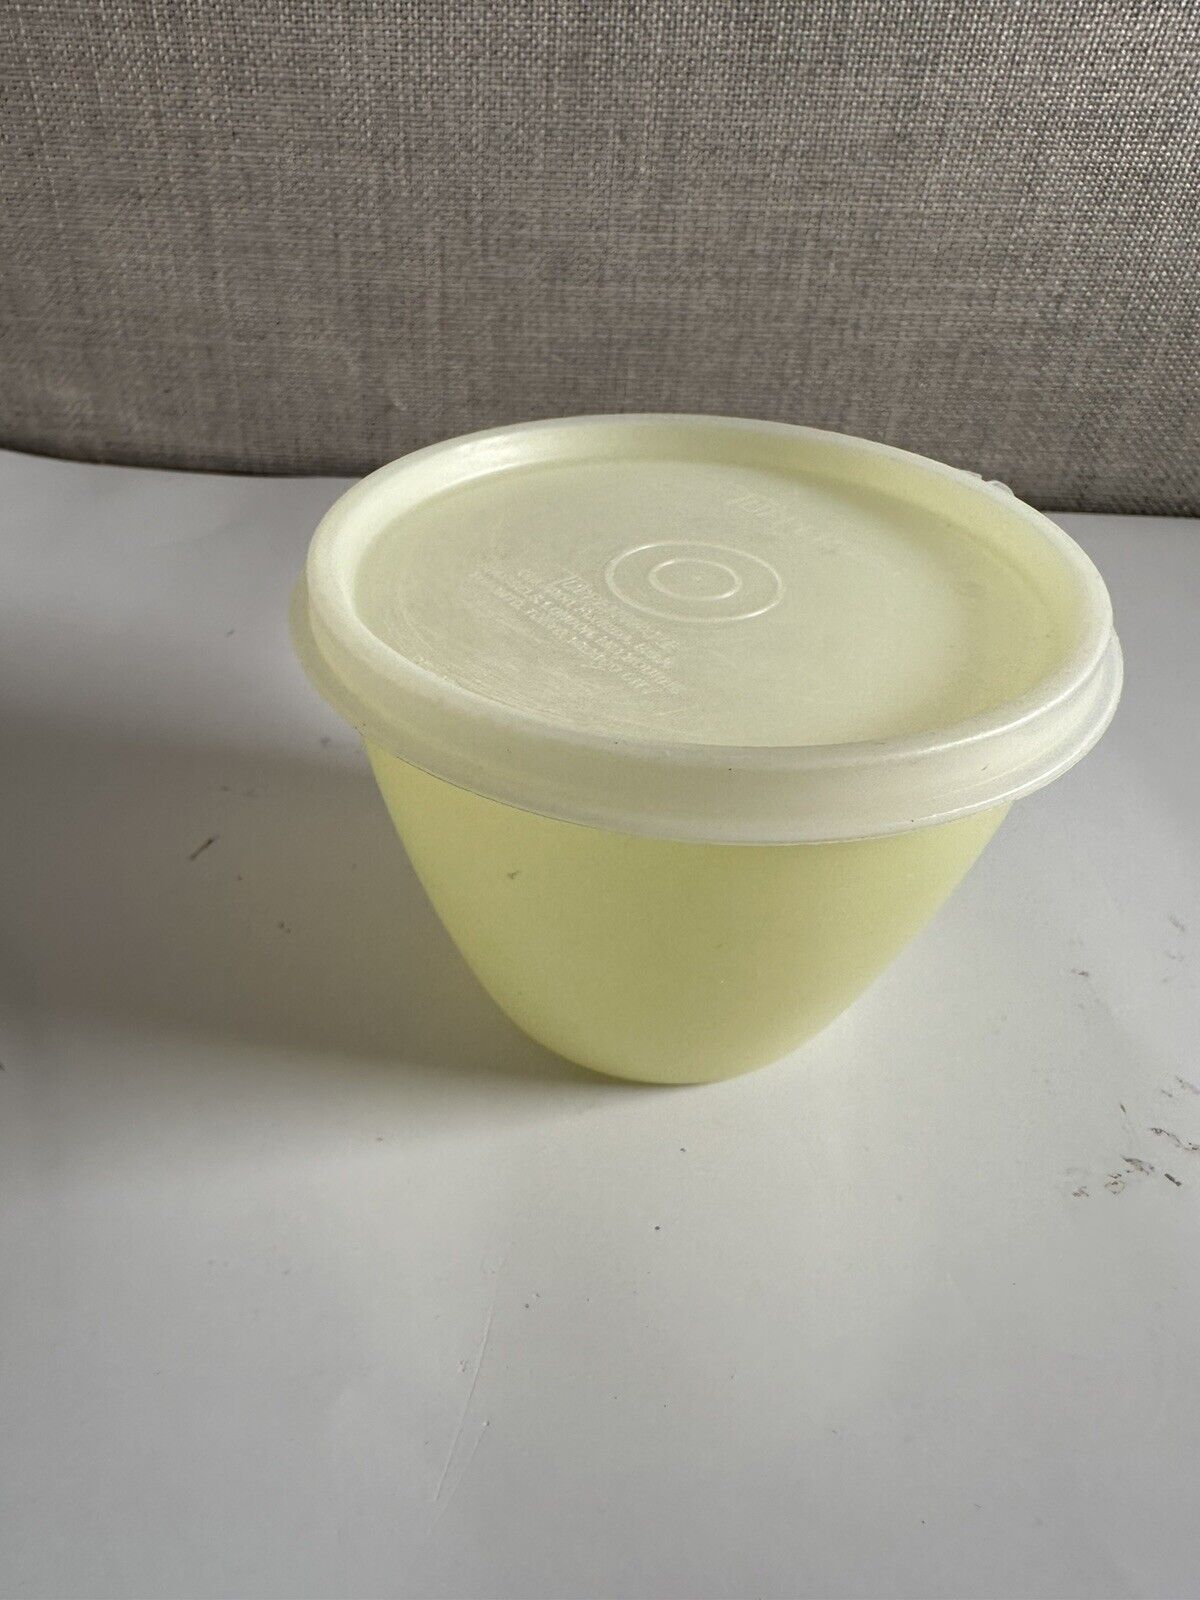 Vintage Tupperware yellow bowl #148-35 with clear lid 215-47